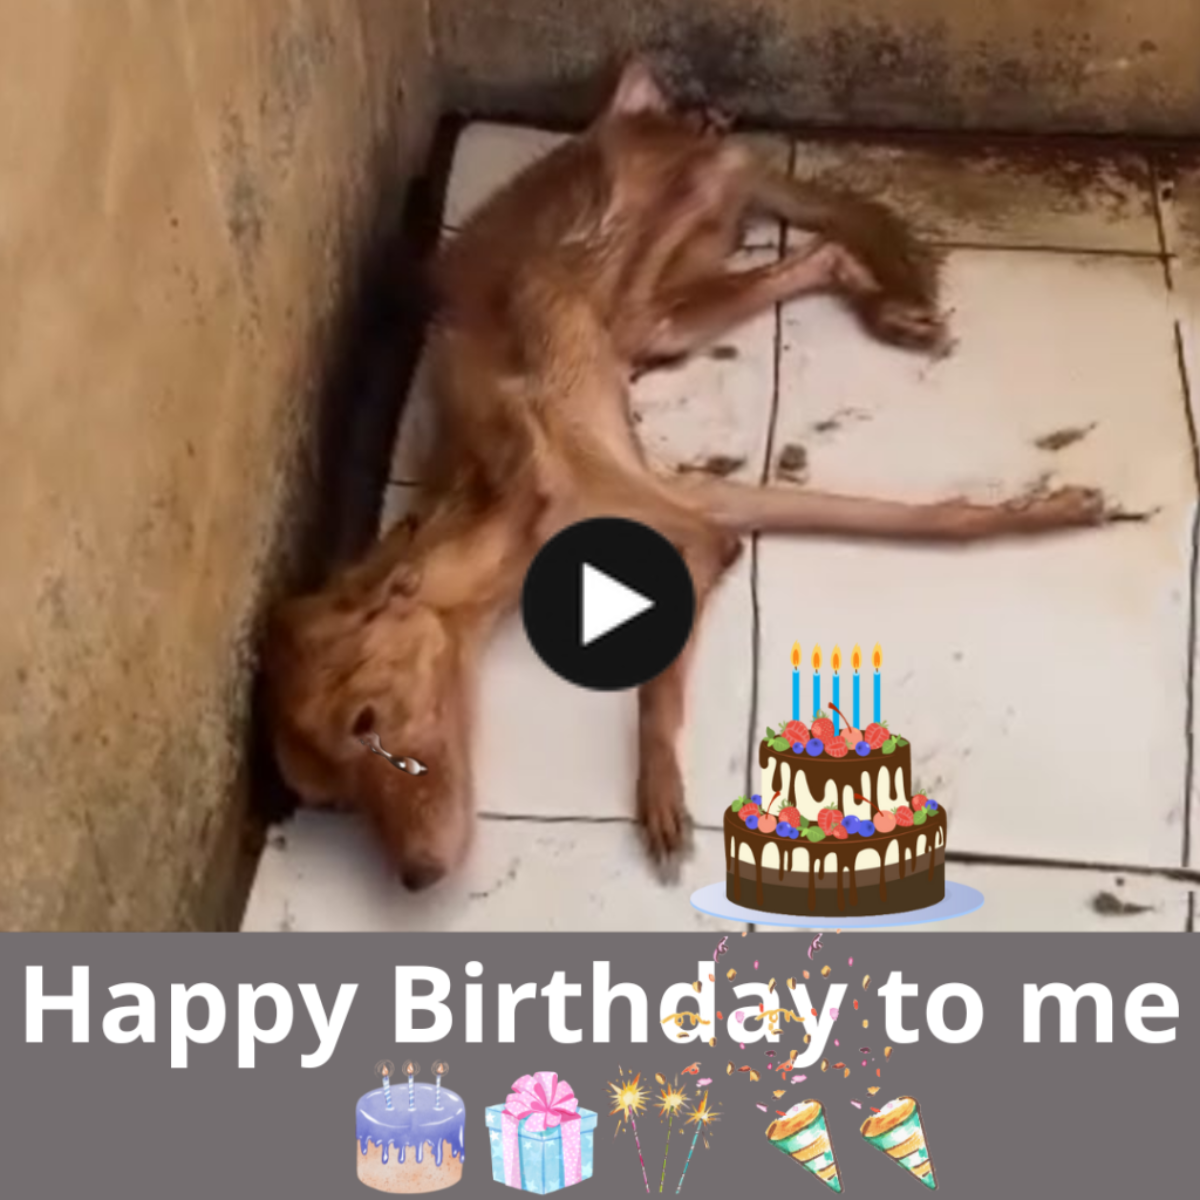 A poor, pitiful birthday: The story of a captive dog touches the hearts of 8 billion people worldwide